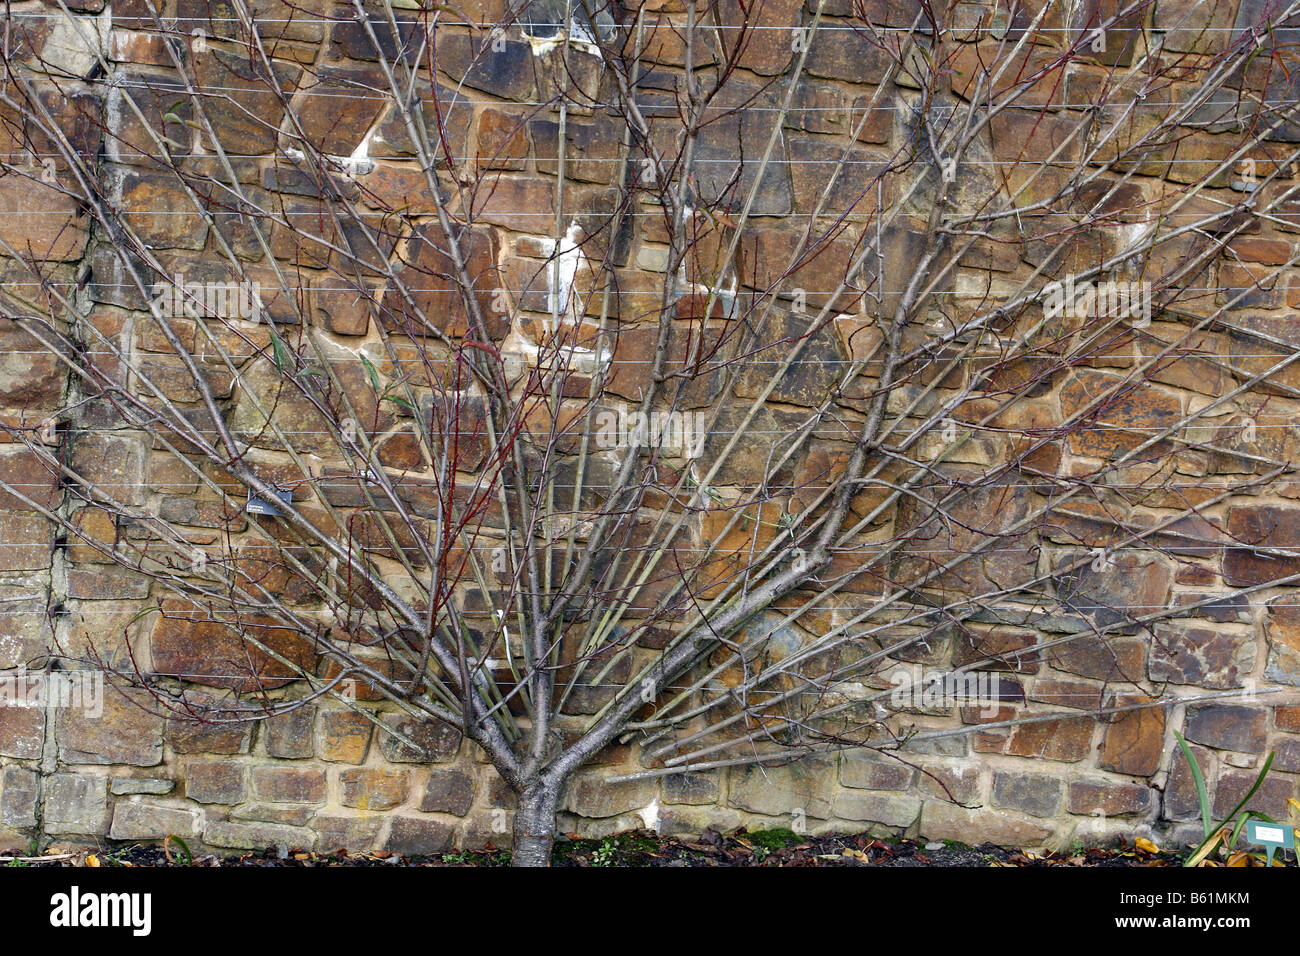 FAN TRAINED FRUIT TREES AT RHS ROSEMOOR GARDEN DEVON PEACH PEREGRINE ON ST JULIEN A PHOTOGRAPHED WITH RHS PERMIT Stock Photo